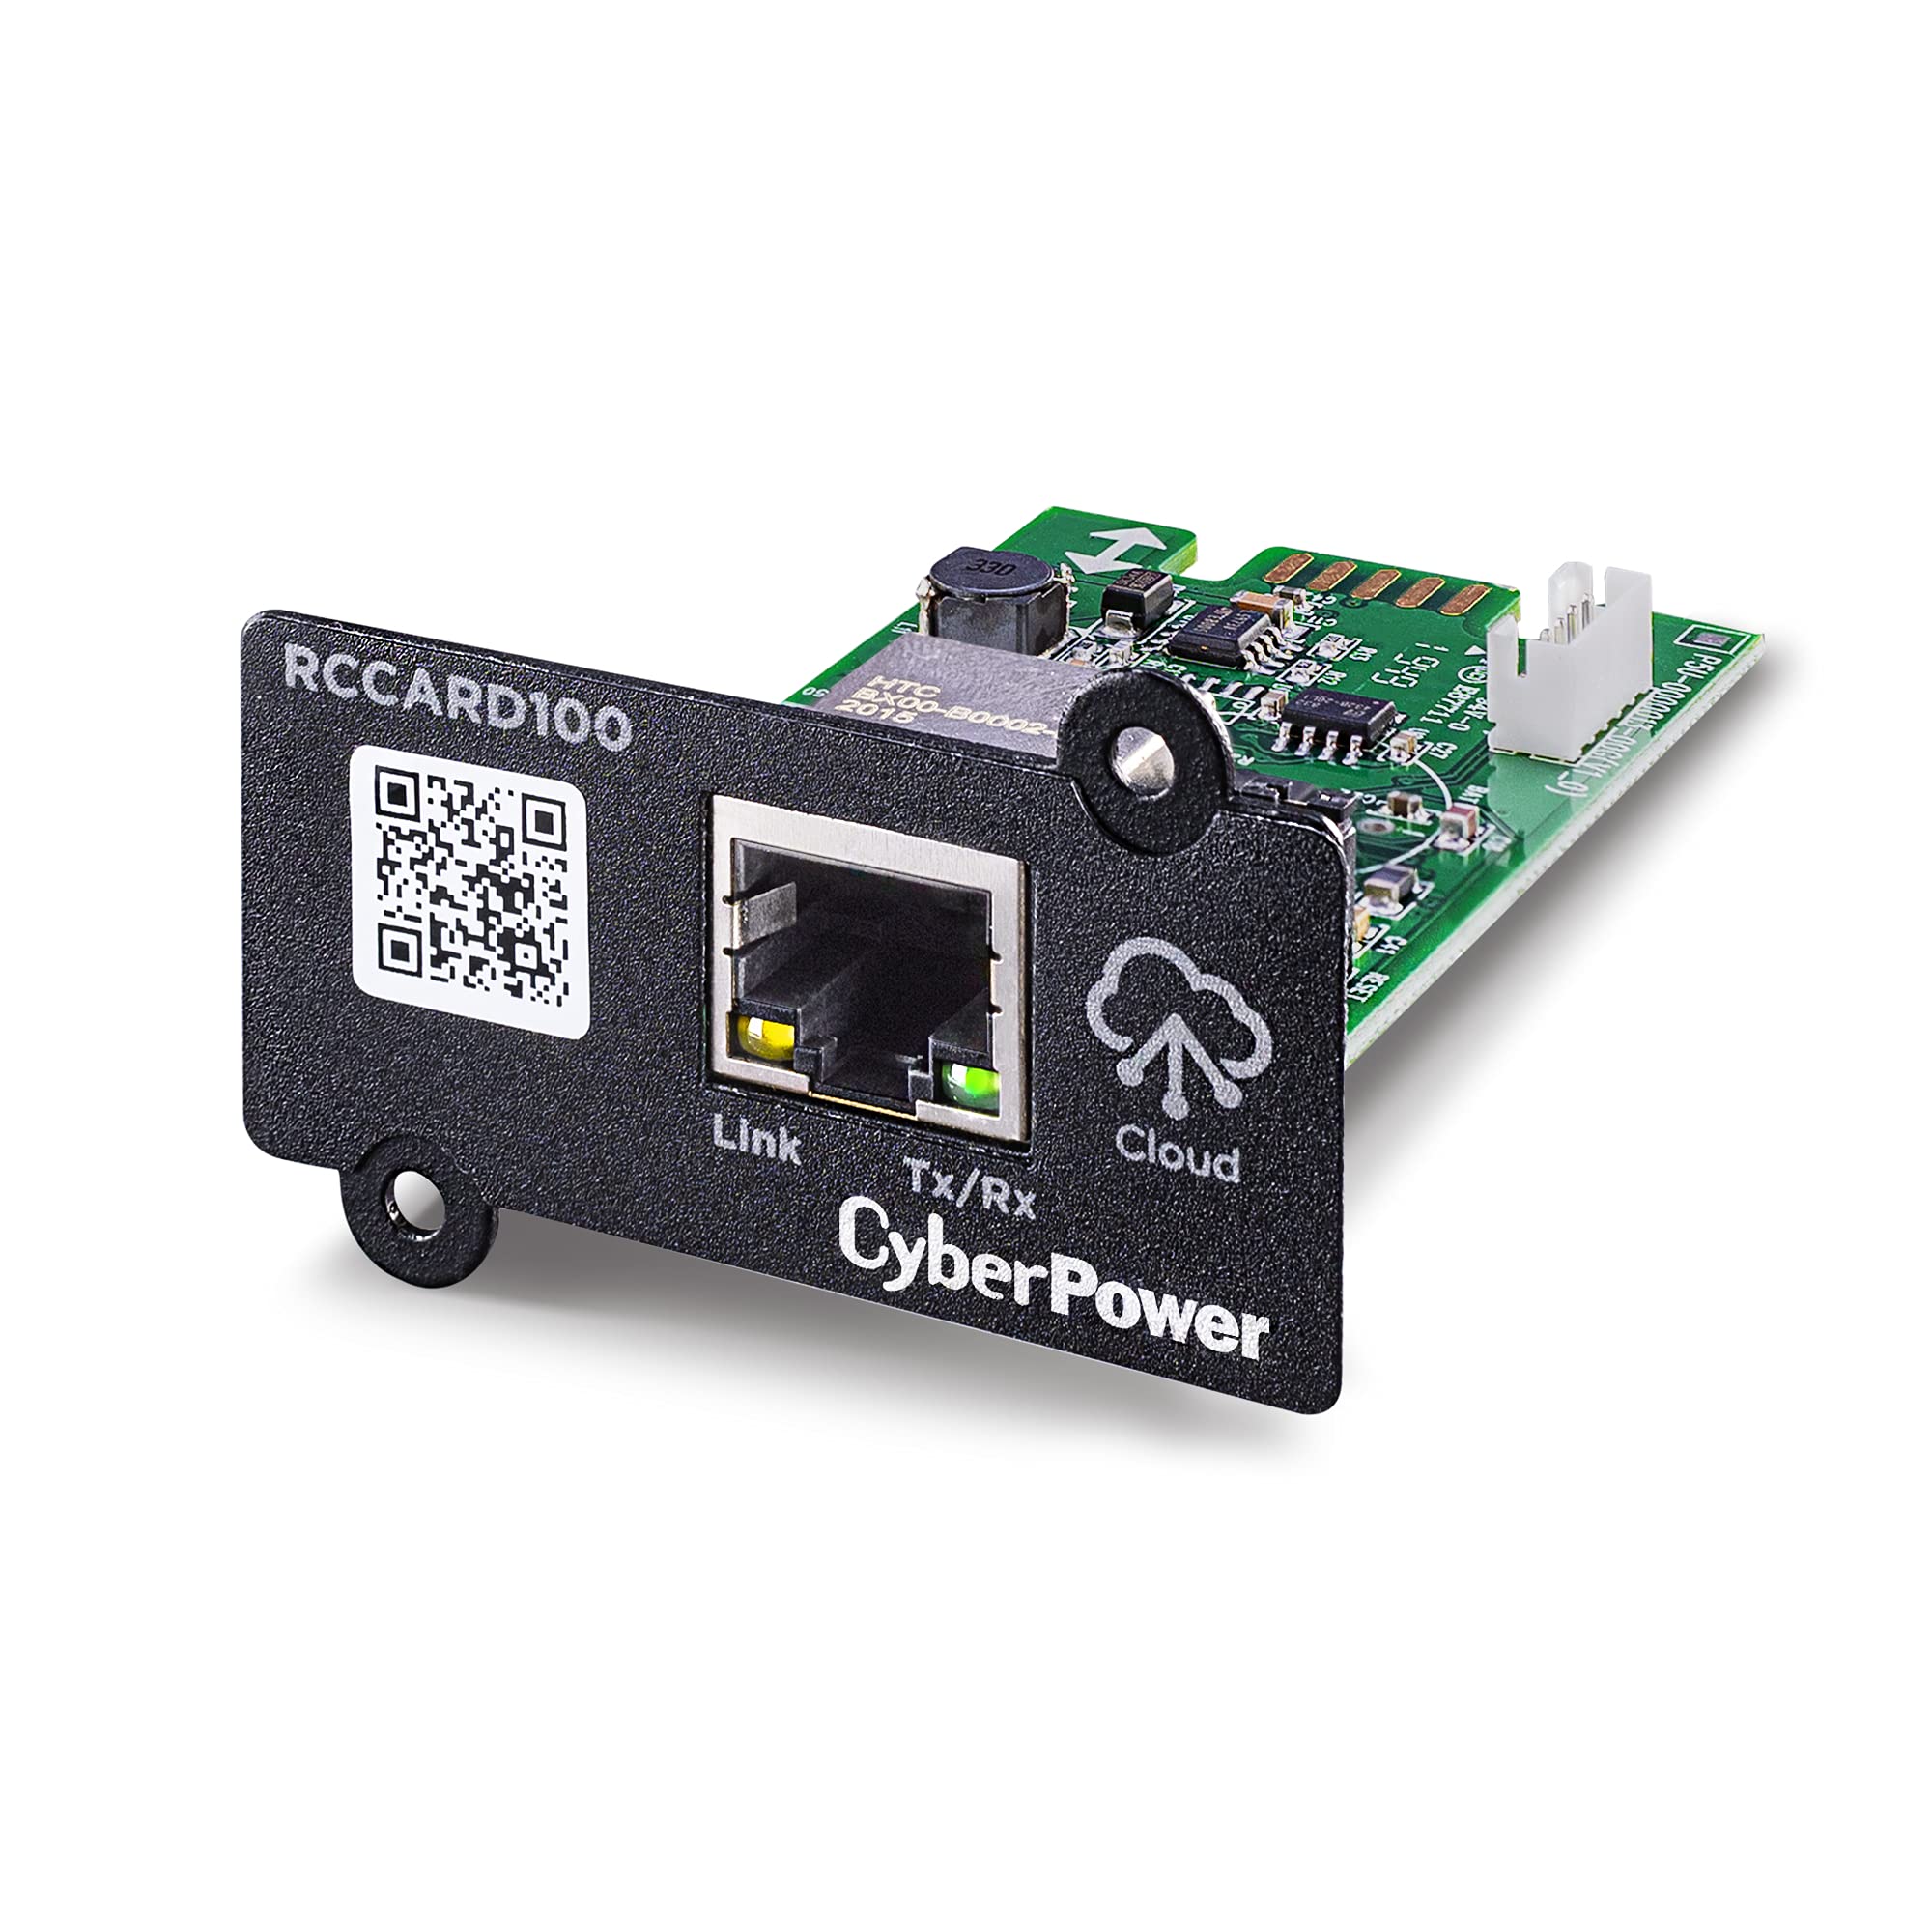 CyberPower RCCARD100 Cloud Monitoring Card